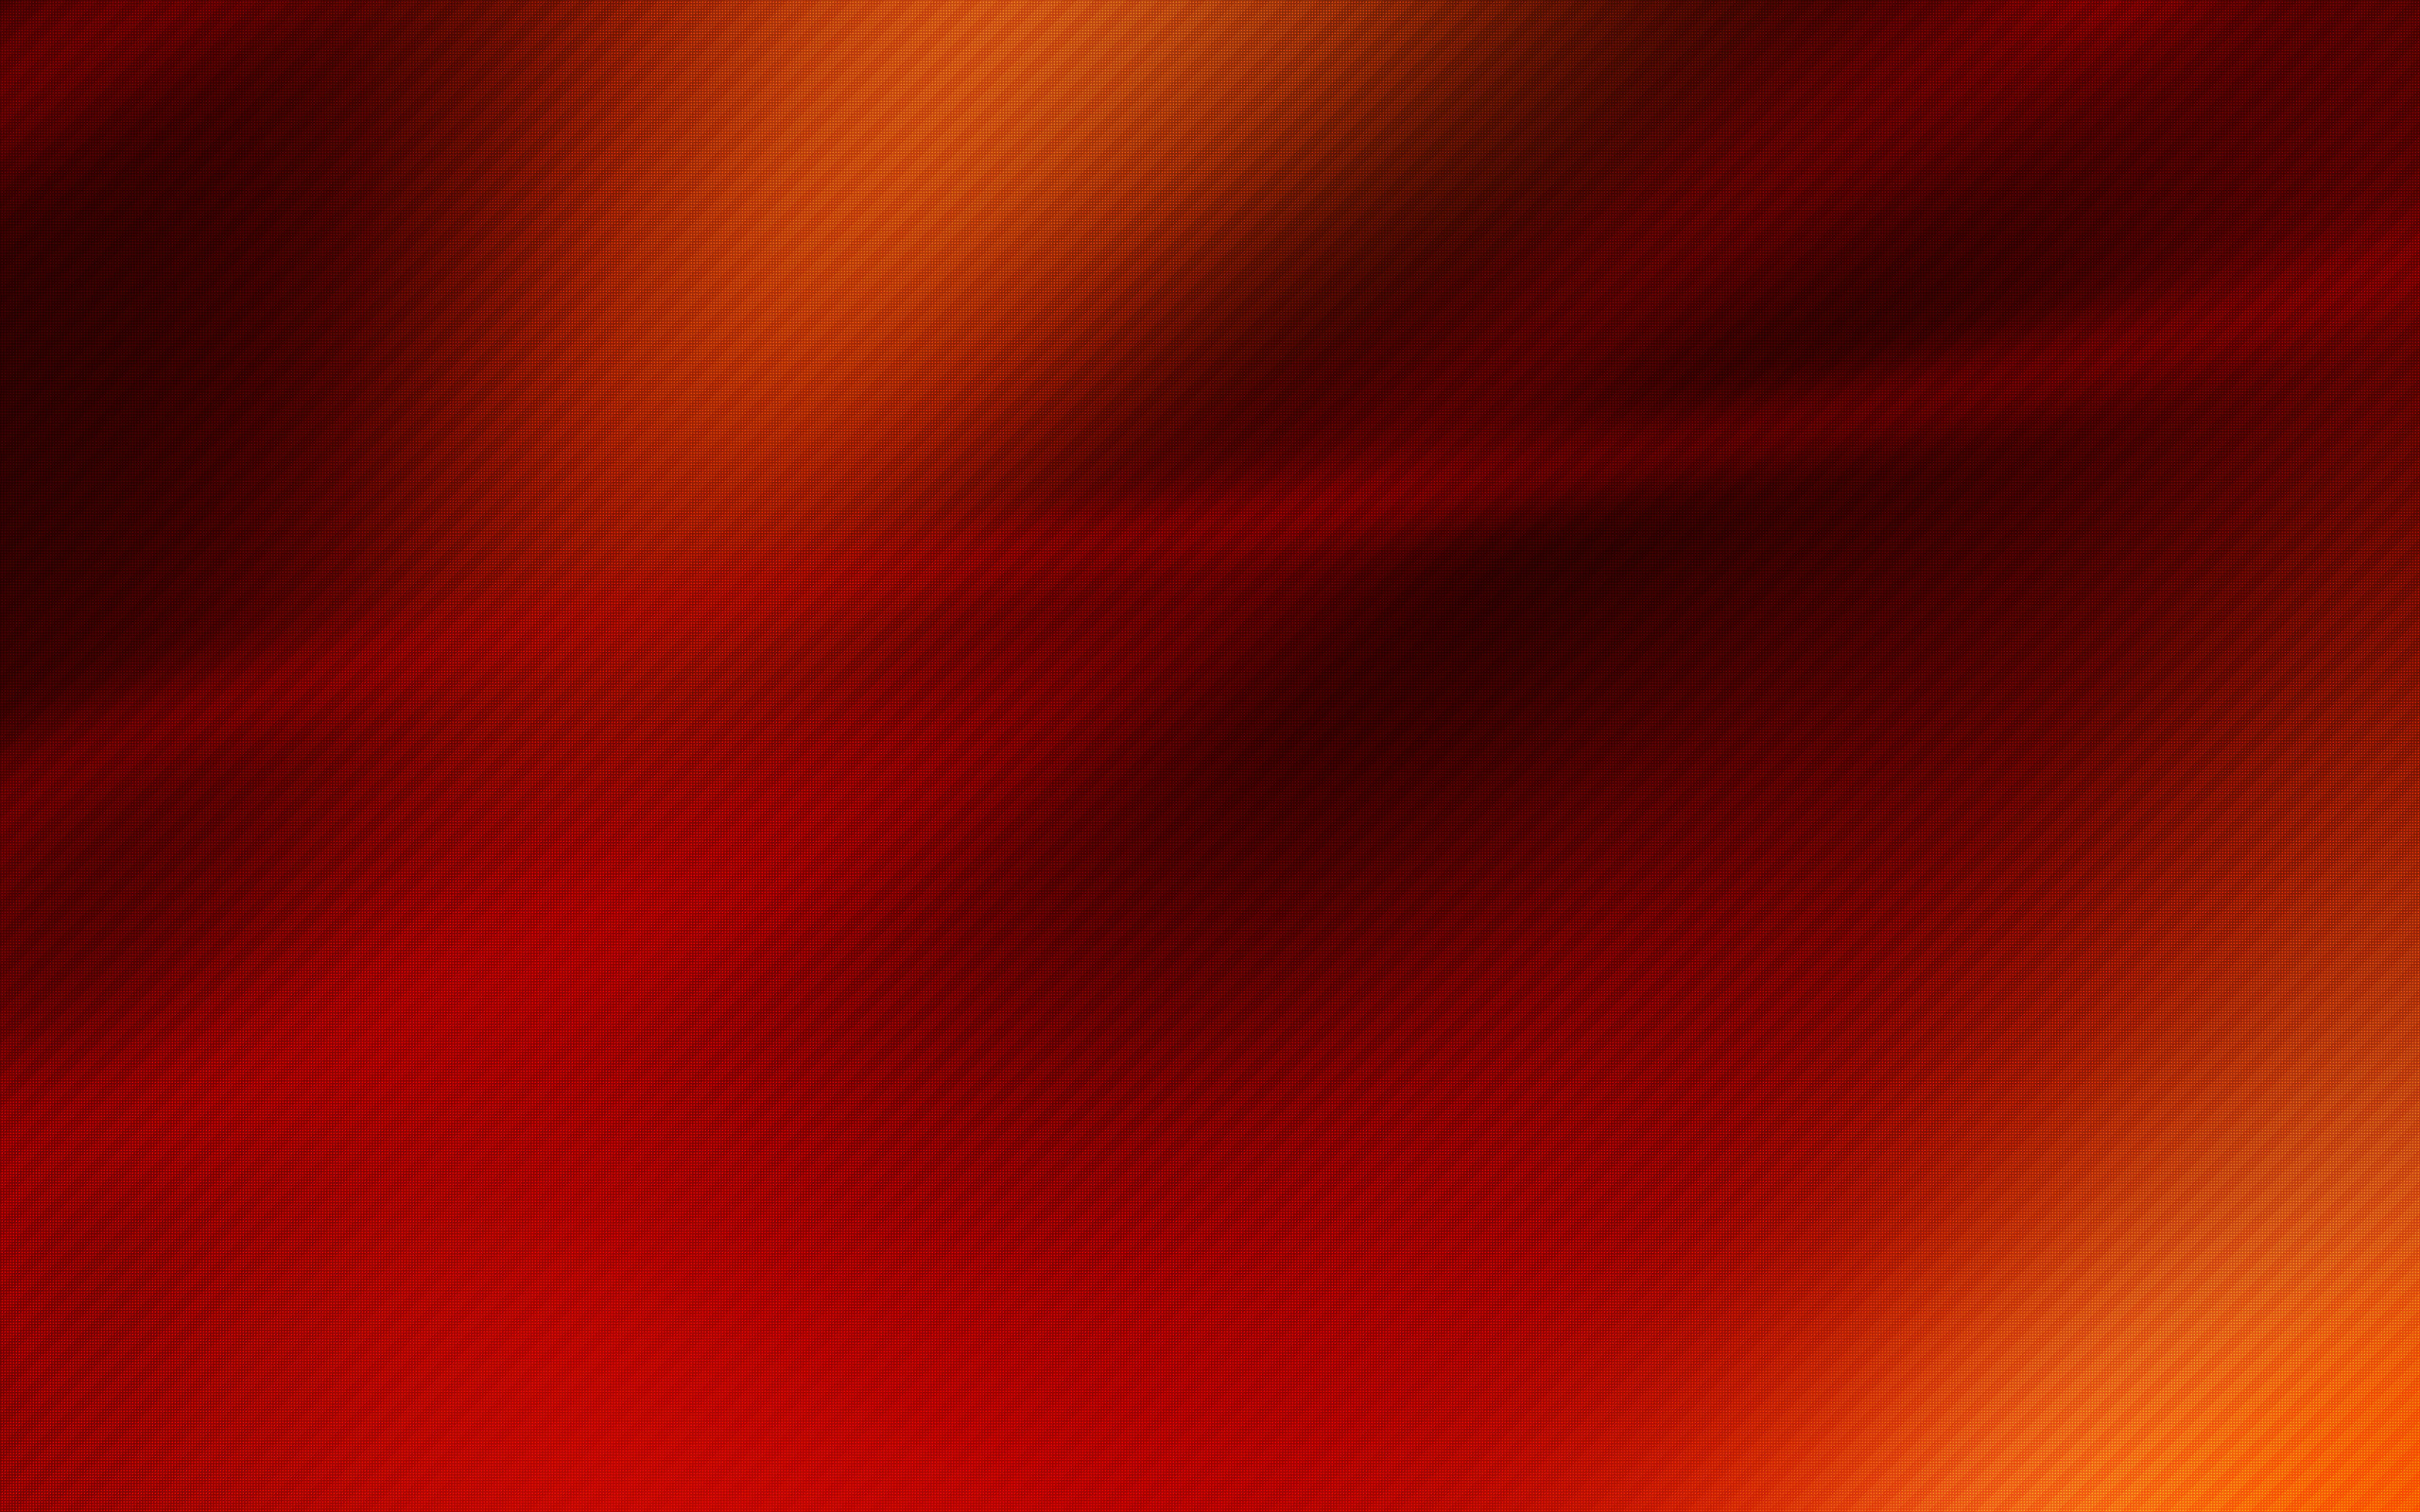 2560x1600 Red And Black Hd Backgrounds 20 Desktop Wallpaper